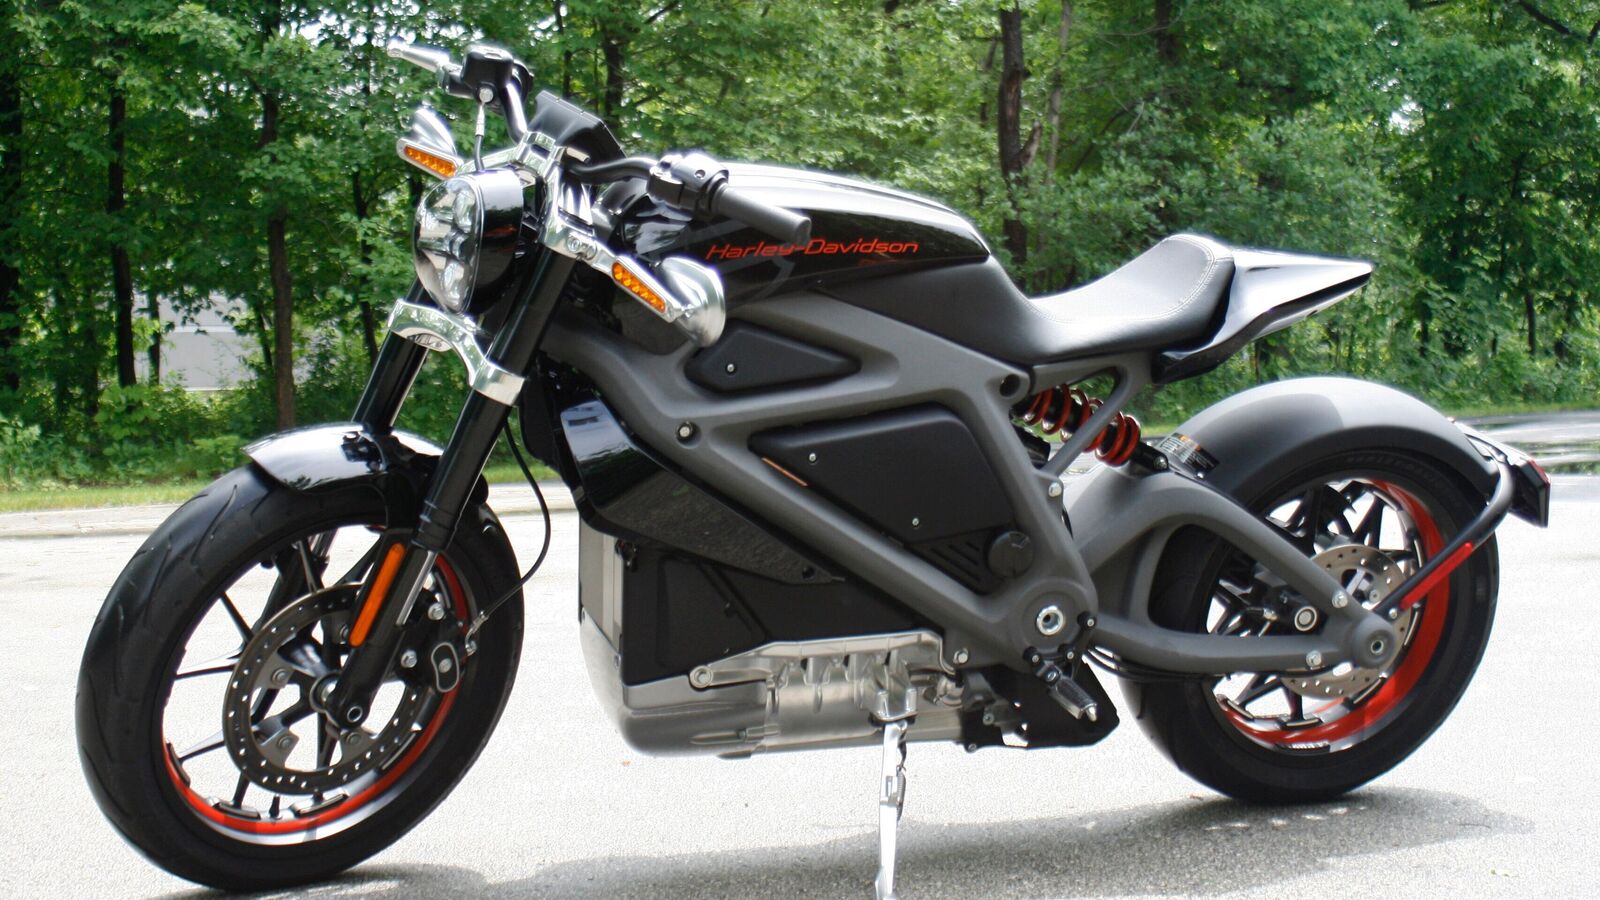 Harley-Davidson's LiveWire ONE electric motorcycle enters Europe